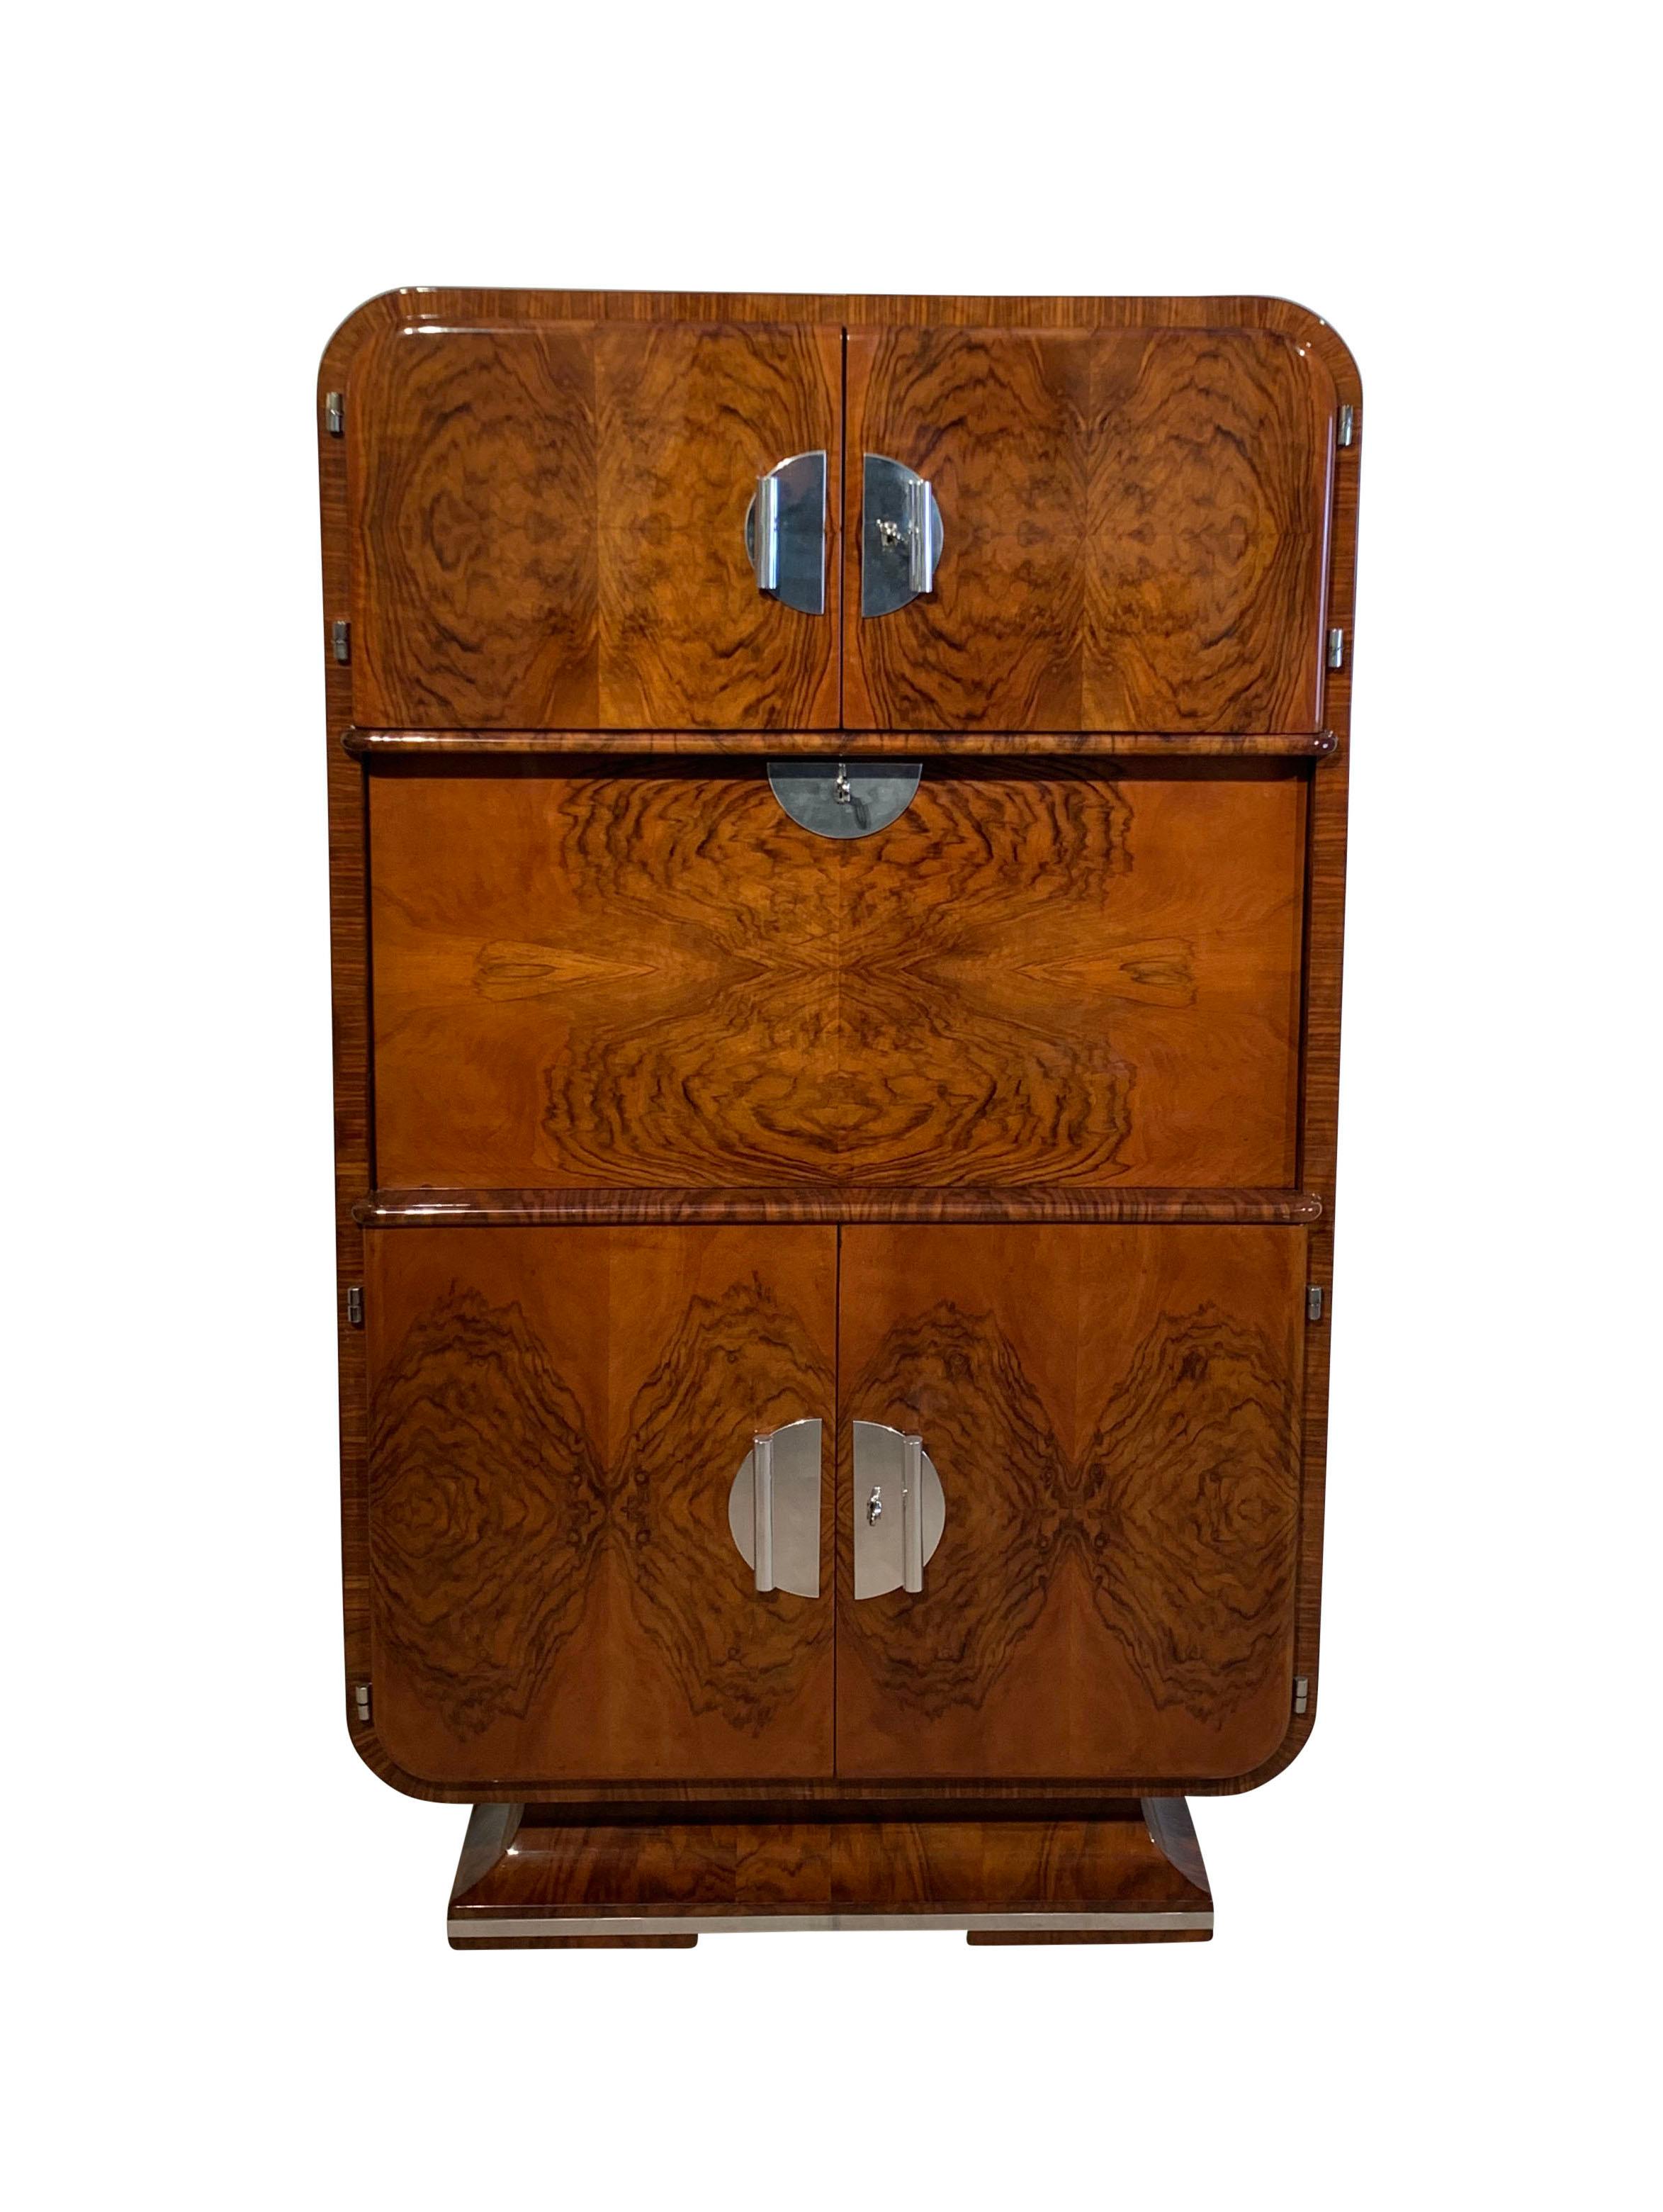 Very rare and elegant French Art Deco Secretaire / Secretary / Writing cabinet in excellently restored condition from France, circa 1930.
Wonderful design with rounded corpus and polished stainless steel trims. Amazing book-matched walnut veneer on